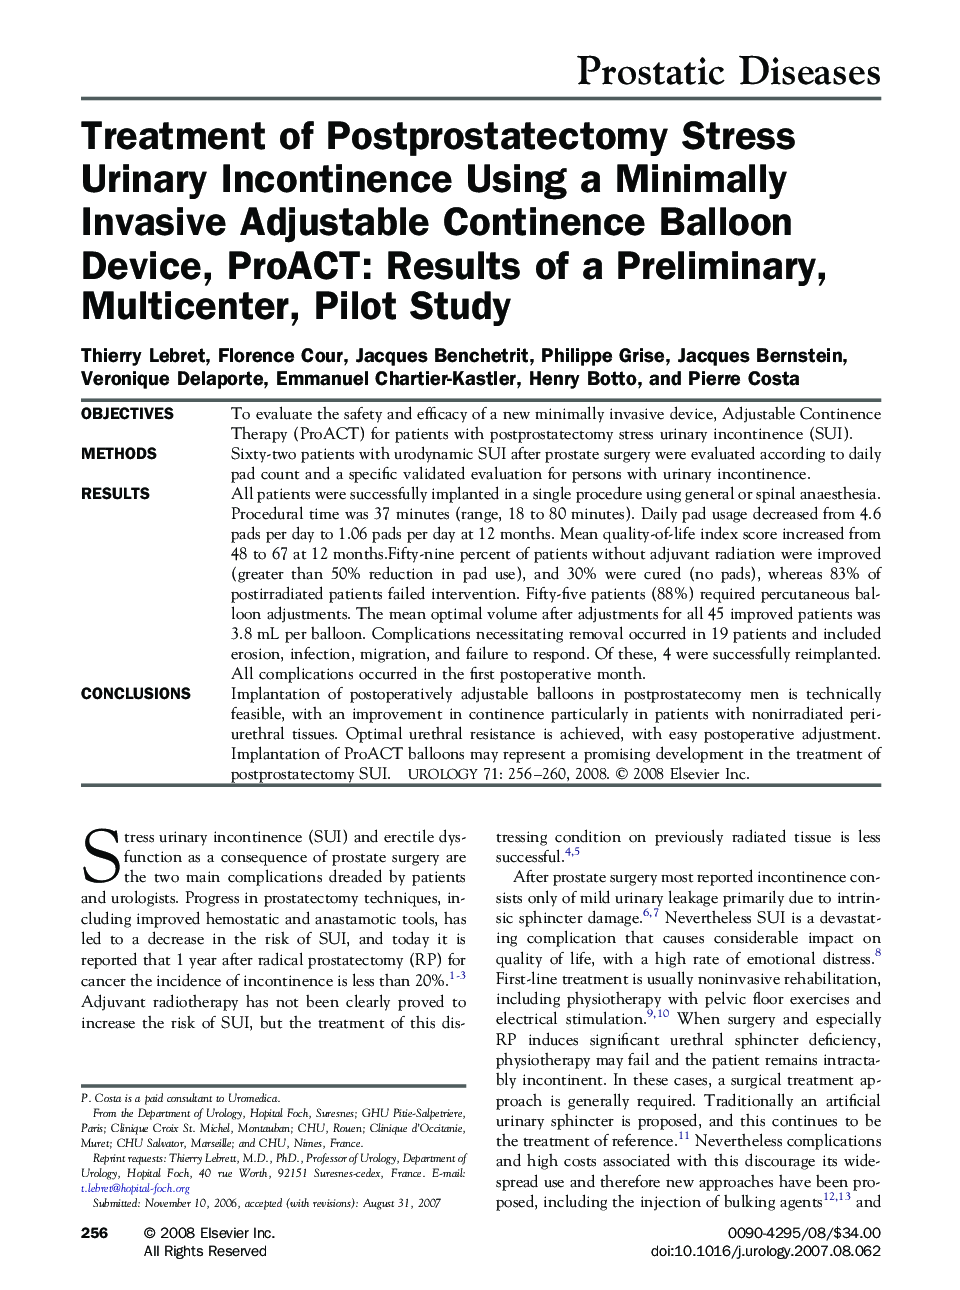 Treatment of Postprostatectomy Stress Urinary Incontinence Using a Minimally Invasive Adjustable Continence Balloon Device, ProACT: Results of a Preliminary, Multicenter, Pilot Study